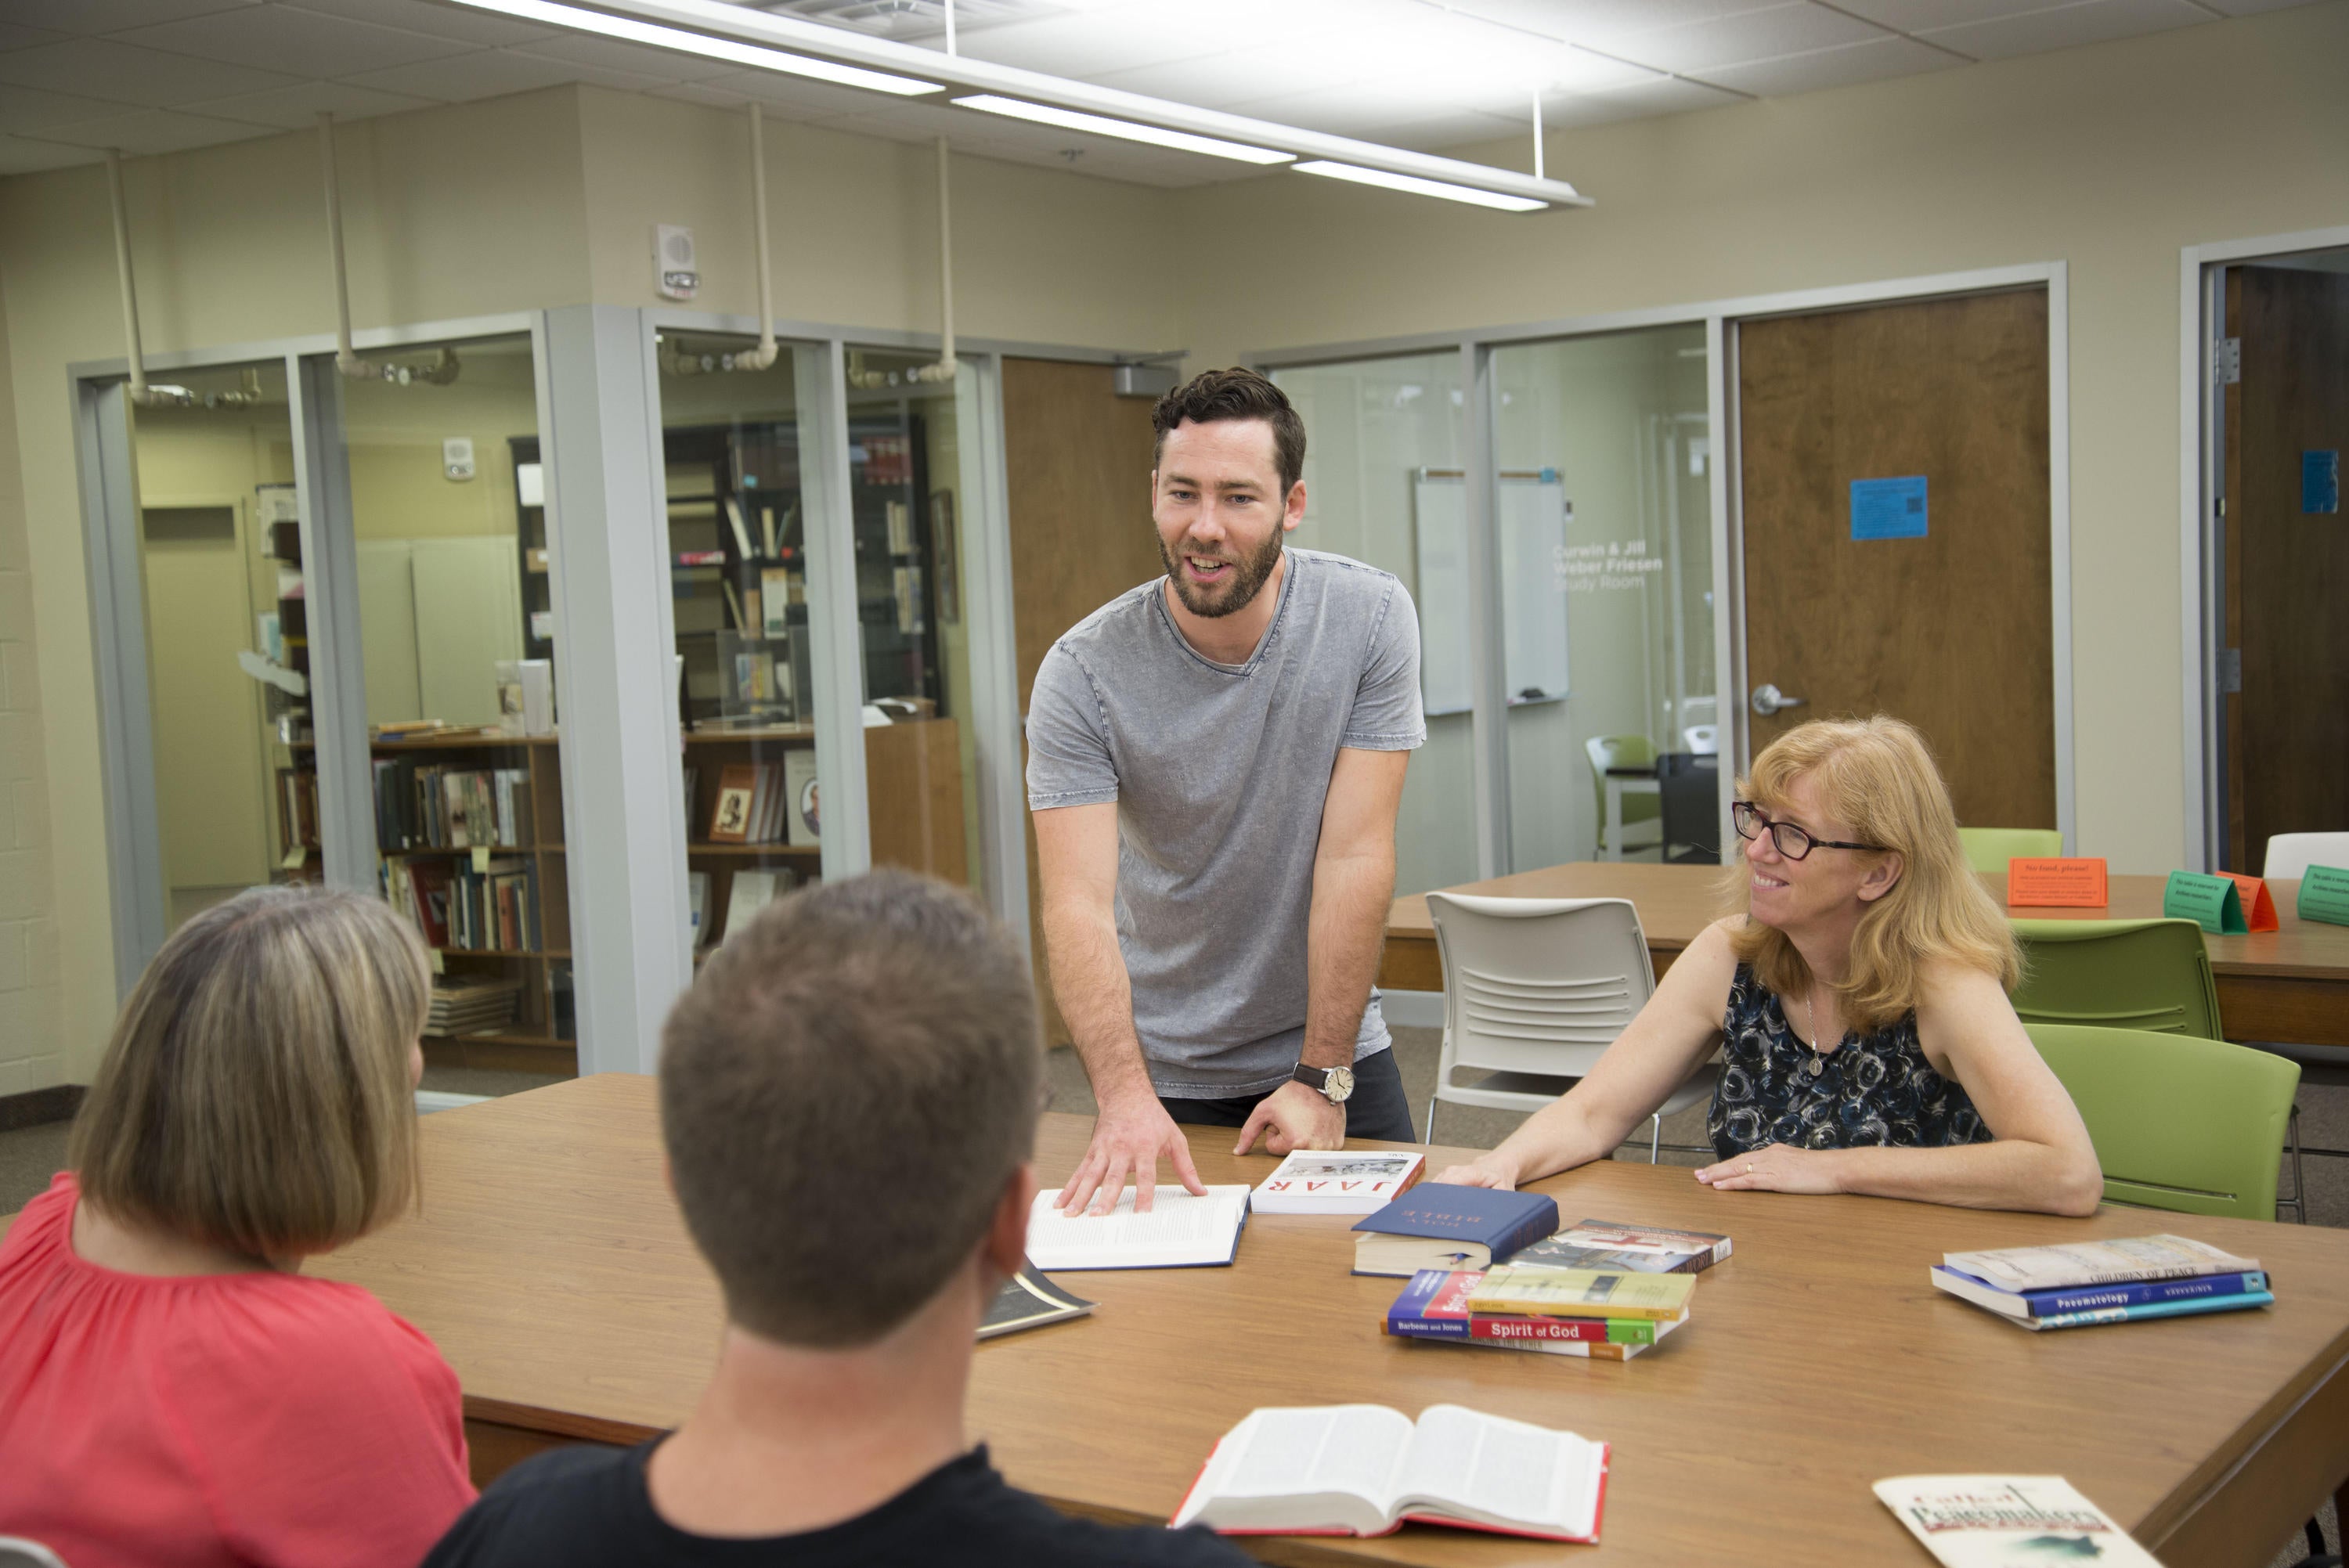 Master of Theological Studies students at Grebel discuss ideas with Professor Carol Penner